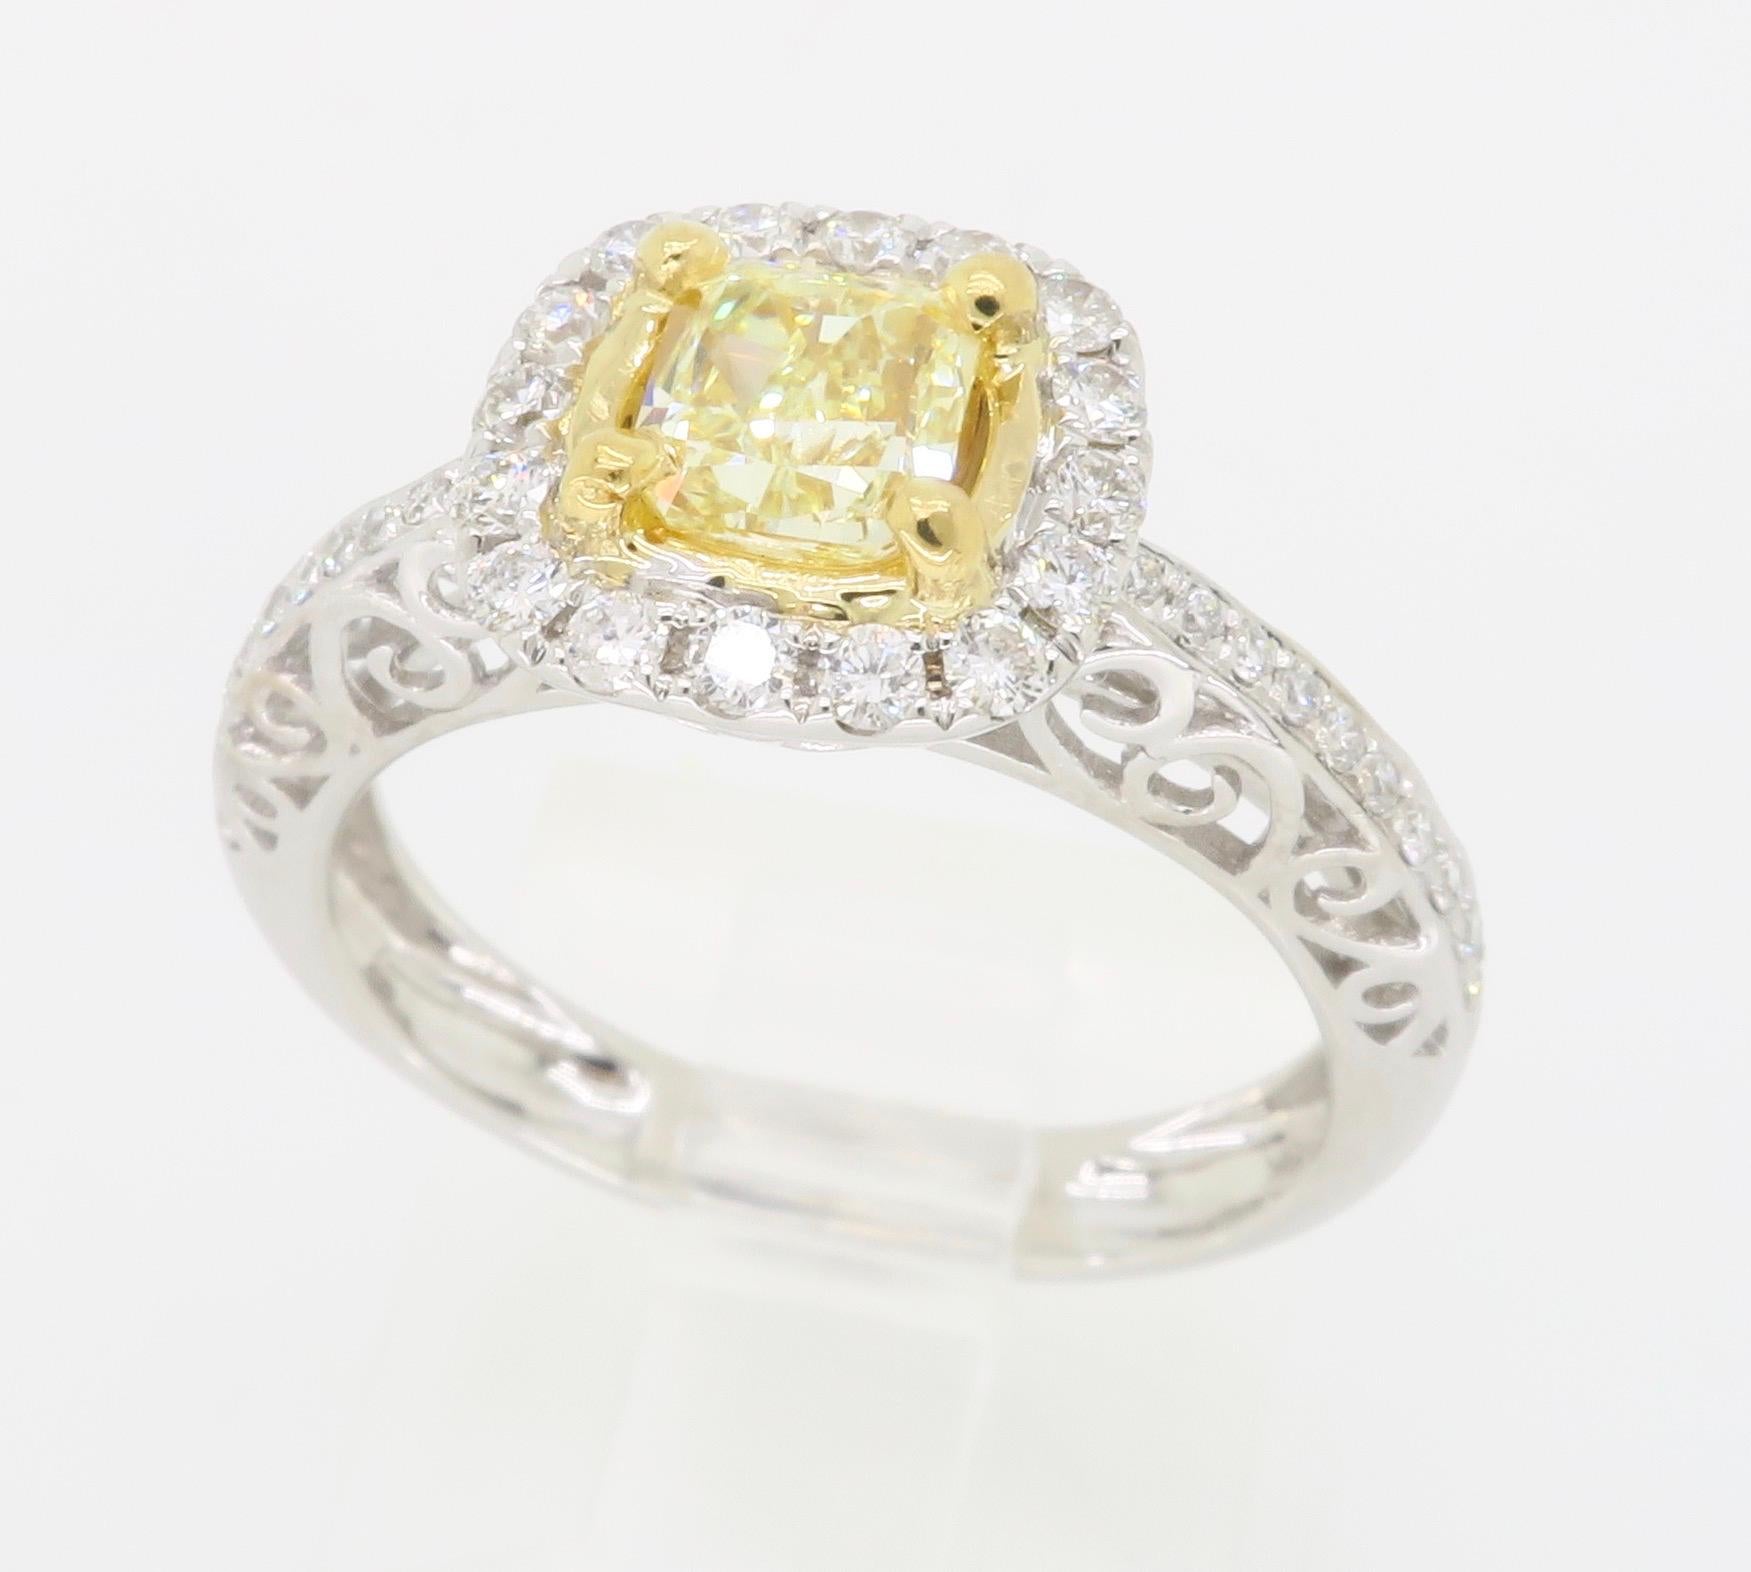 Fancy Yellow Diamond Halo Engagement Ring in 18k For Sale 4